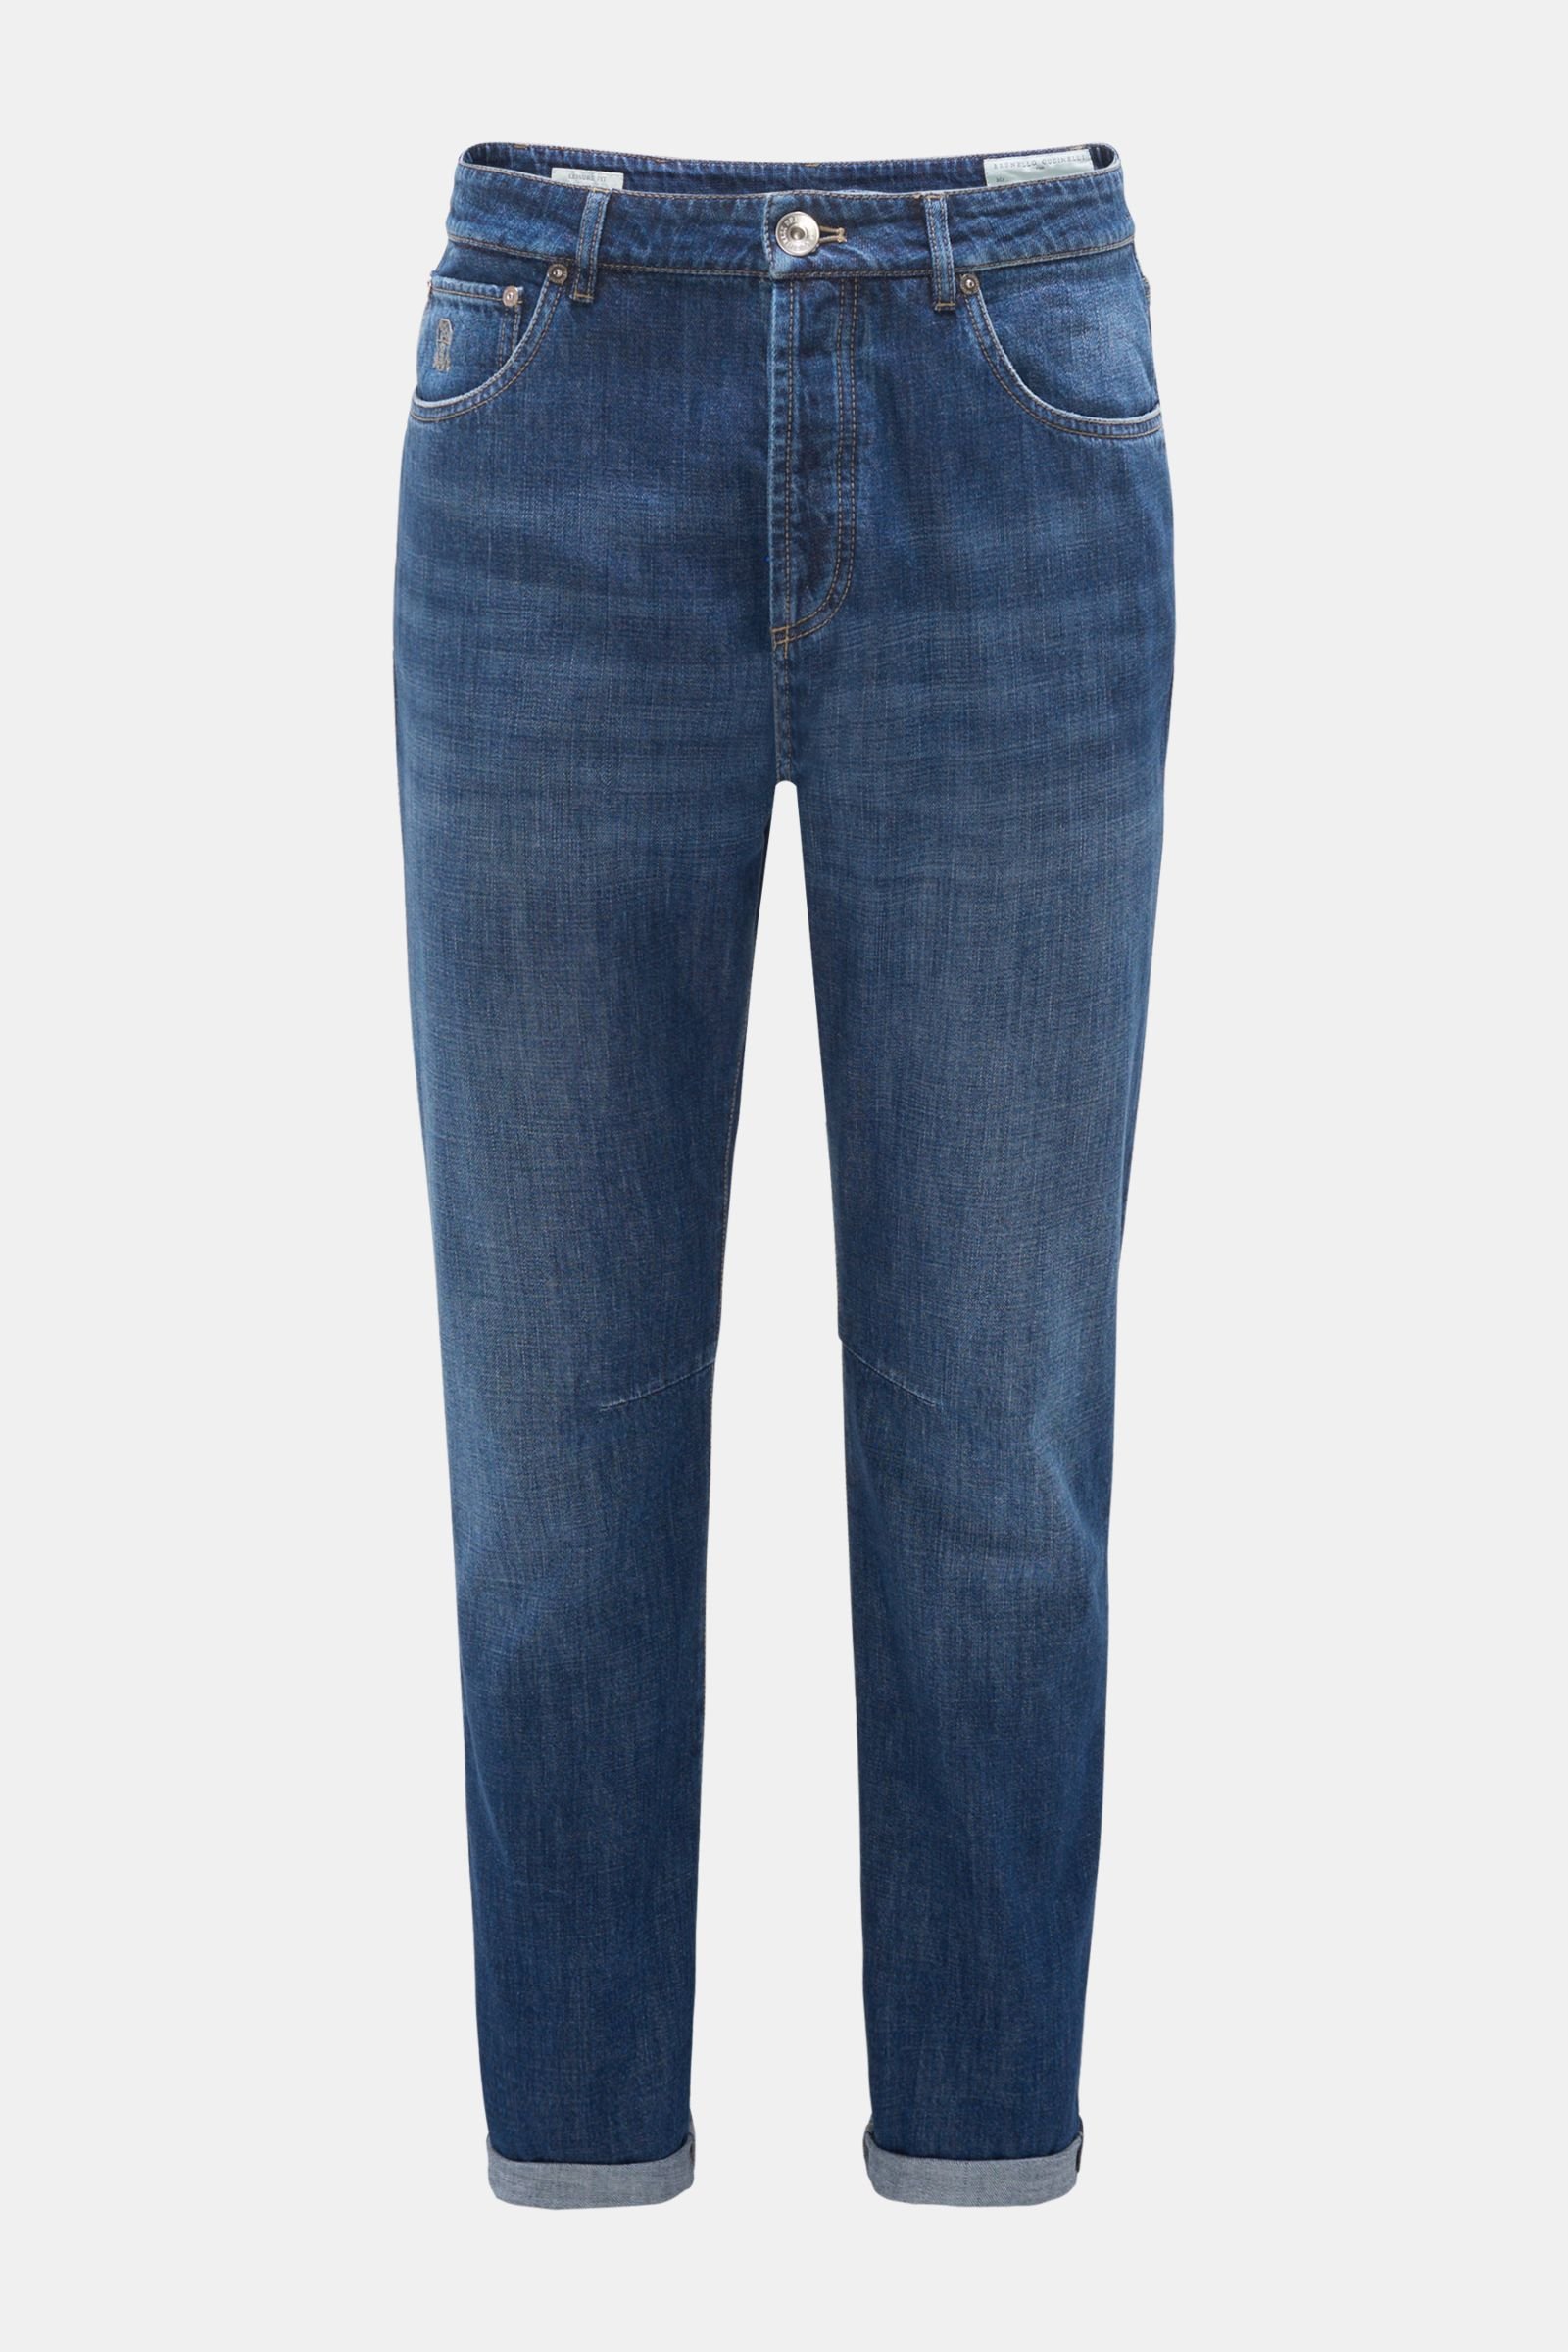 Jeans 'Leisure Fit' navy